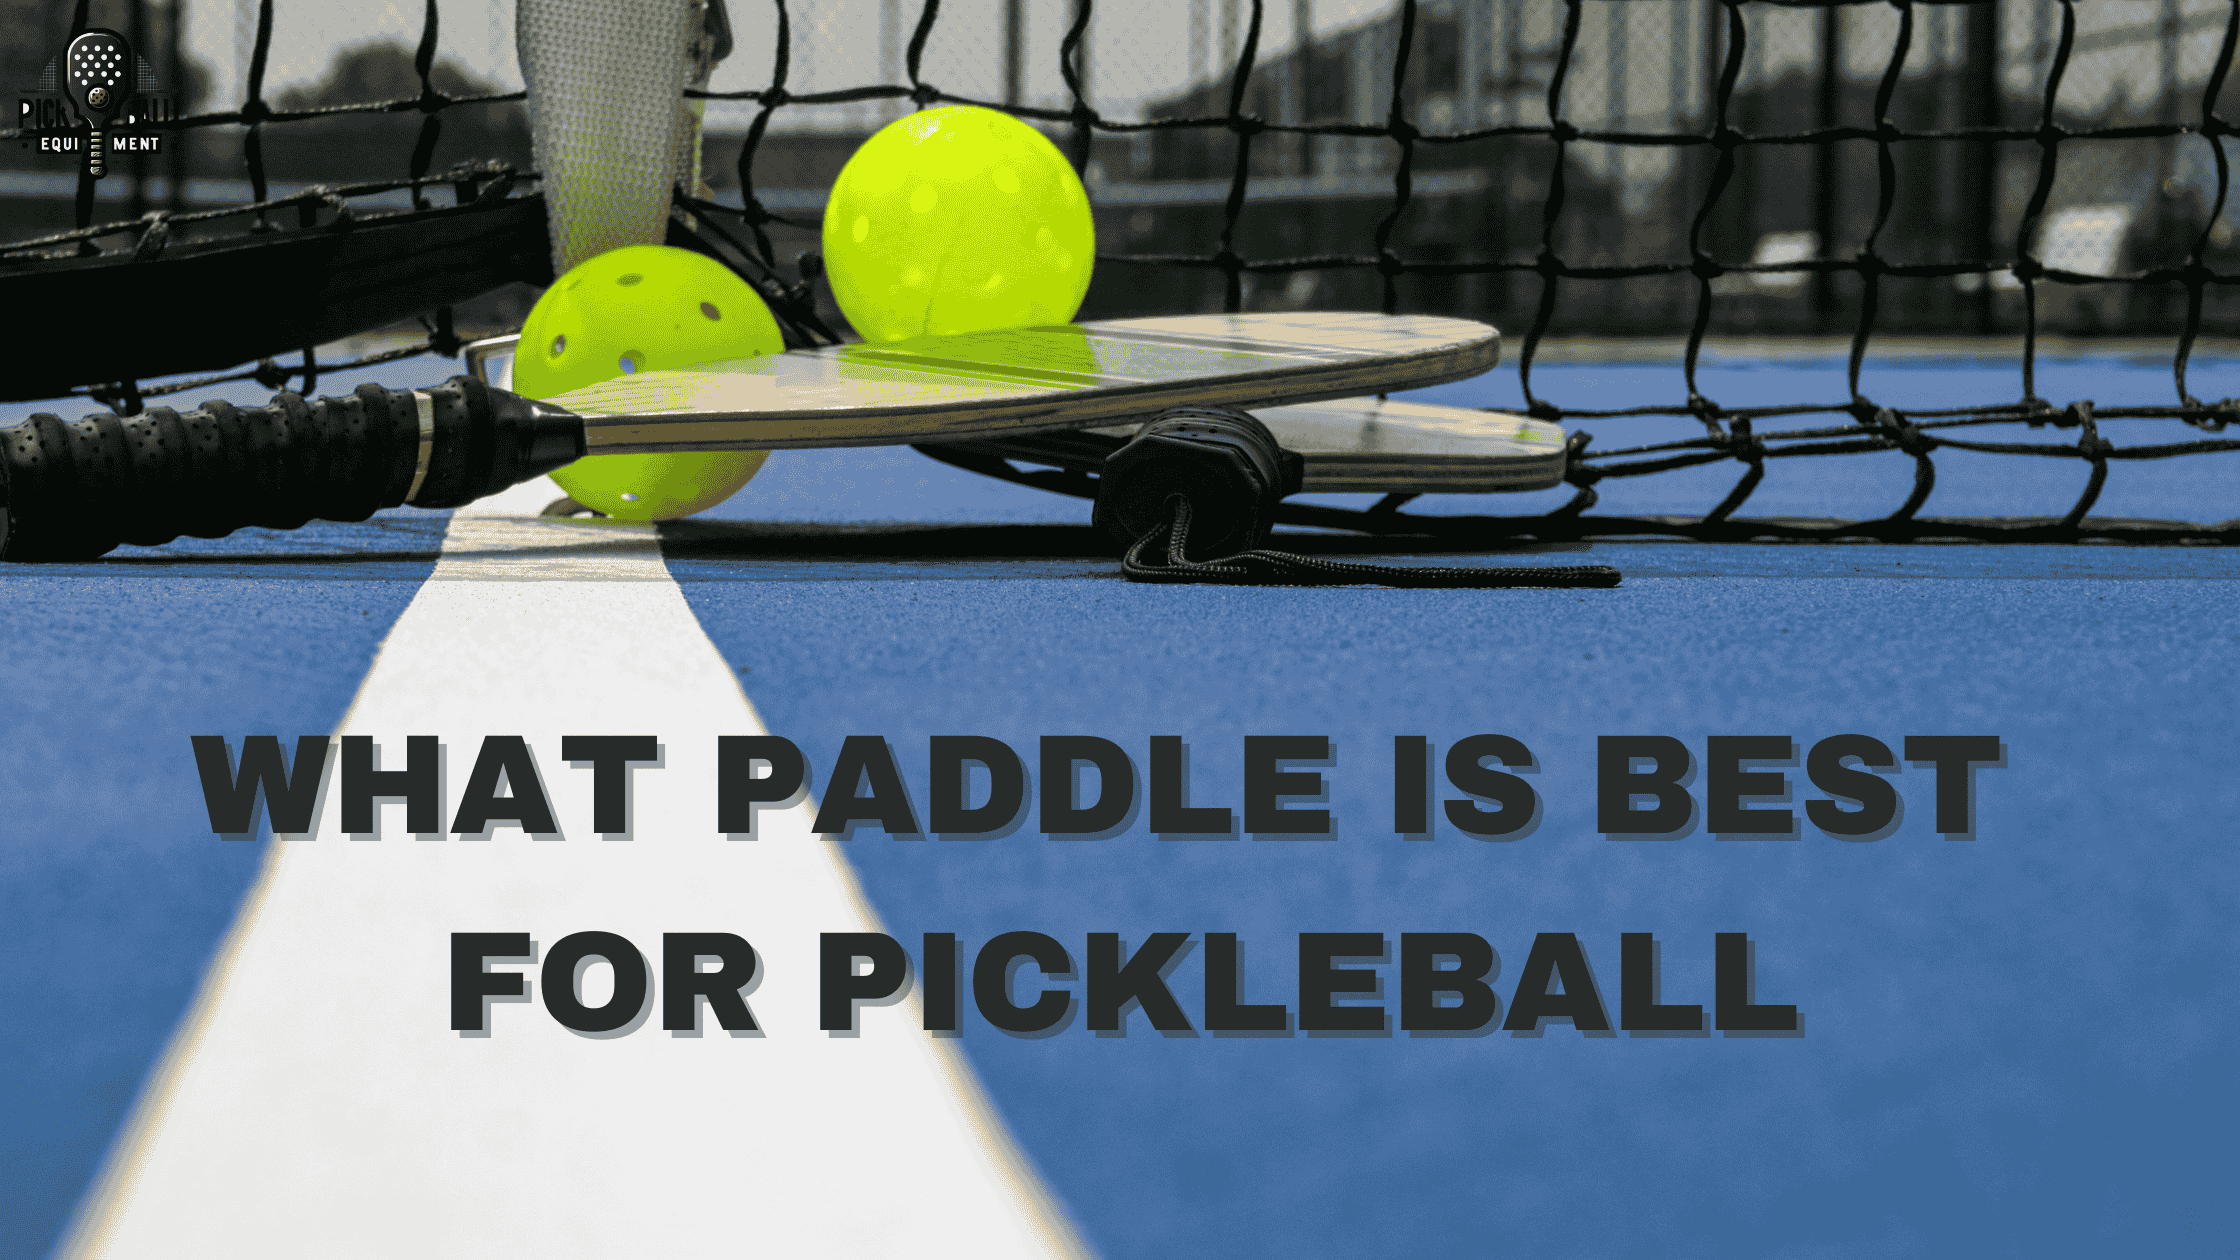 What Paddle is Best for Pickleball